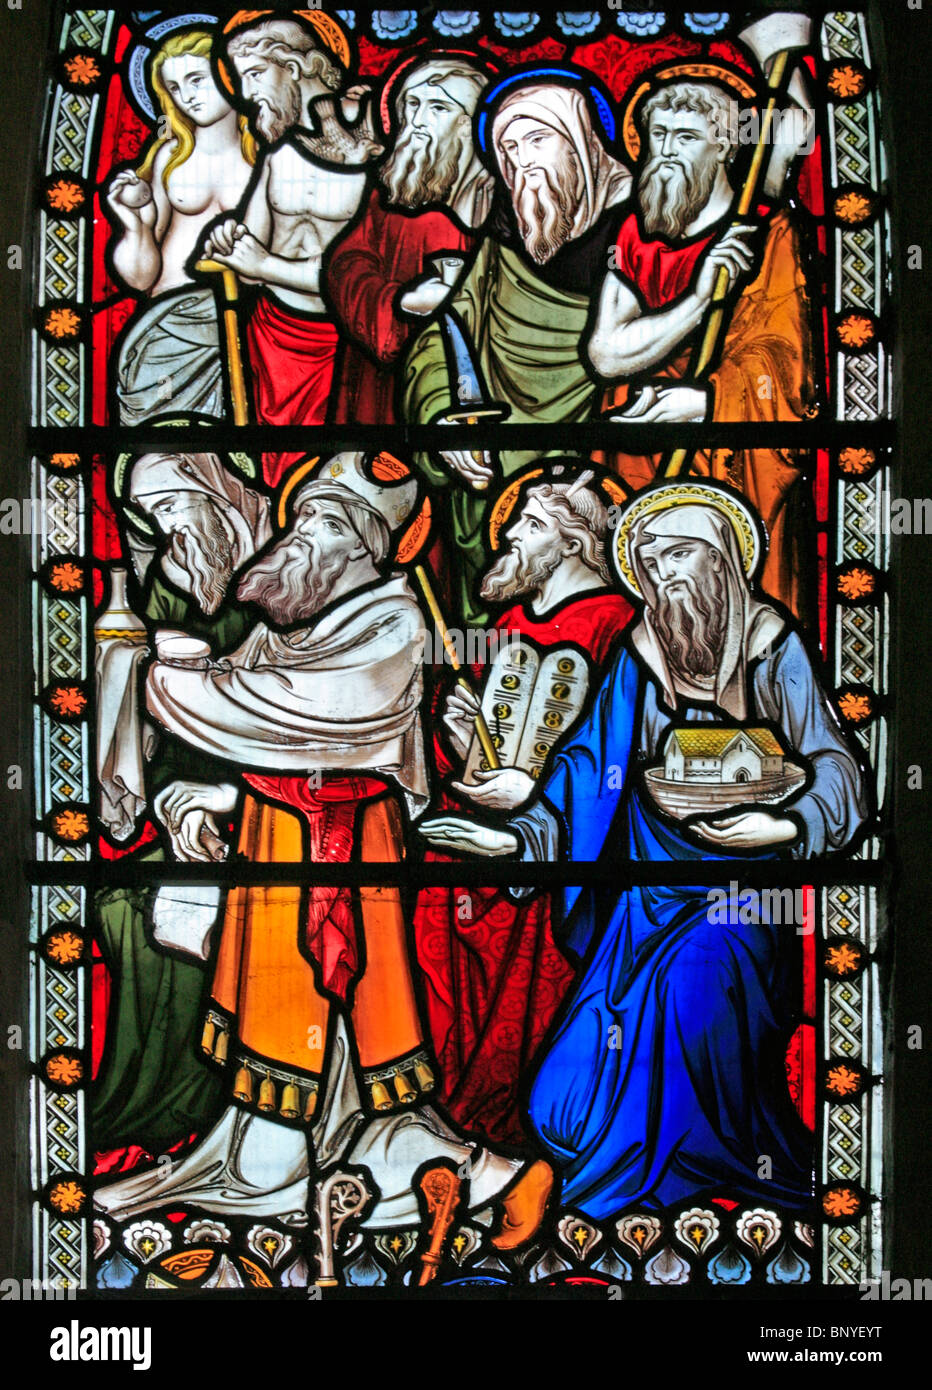 A stained glass window designed by John Hardman Powell depicting figures from the Old and NewTestaments, All Saints Church, Ladbroke, Warwickshire Stock Photo